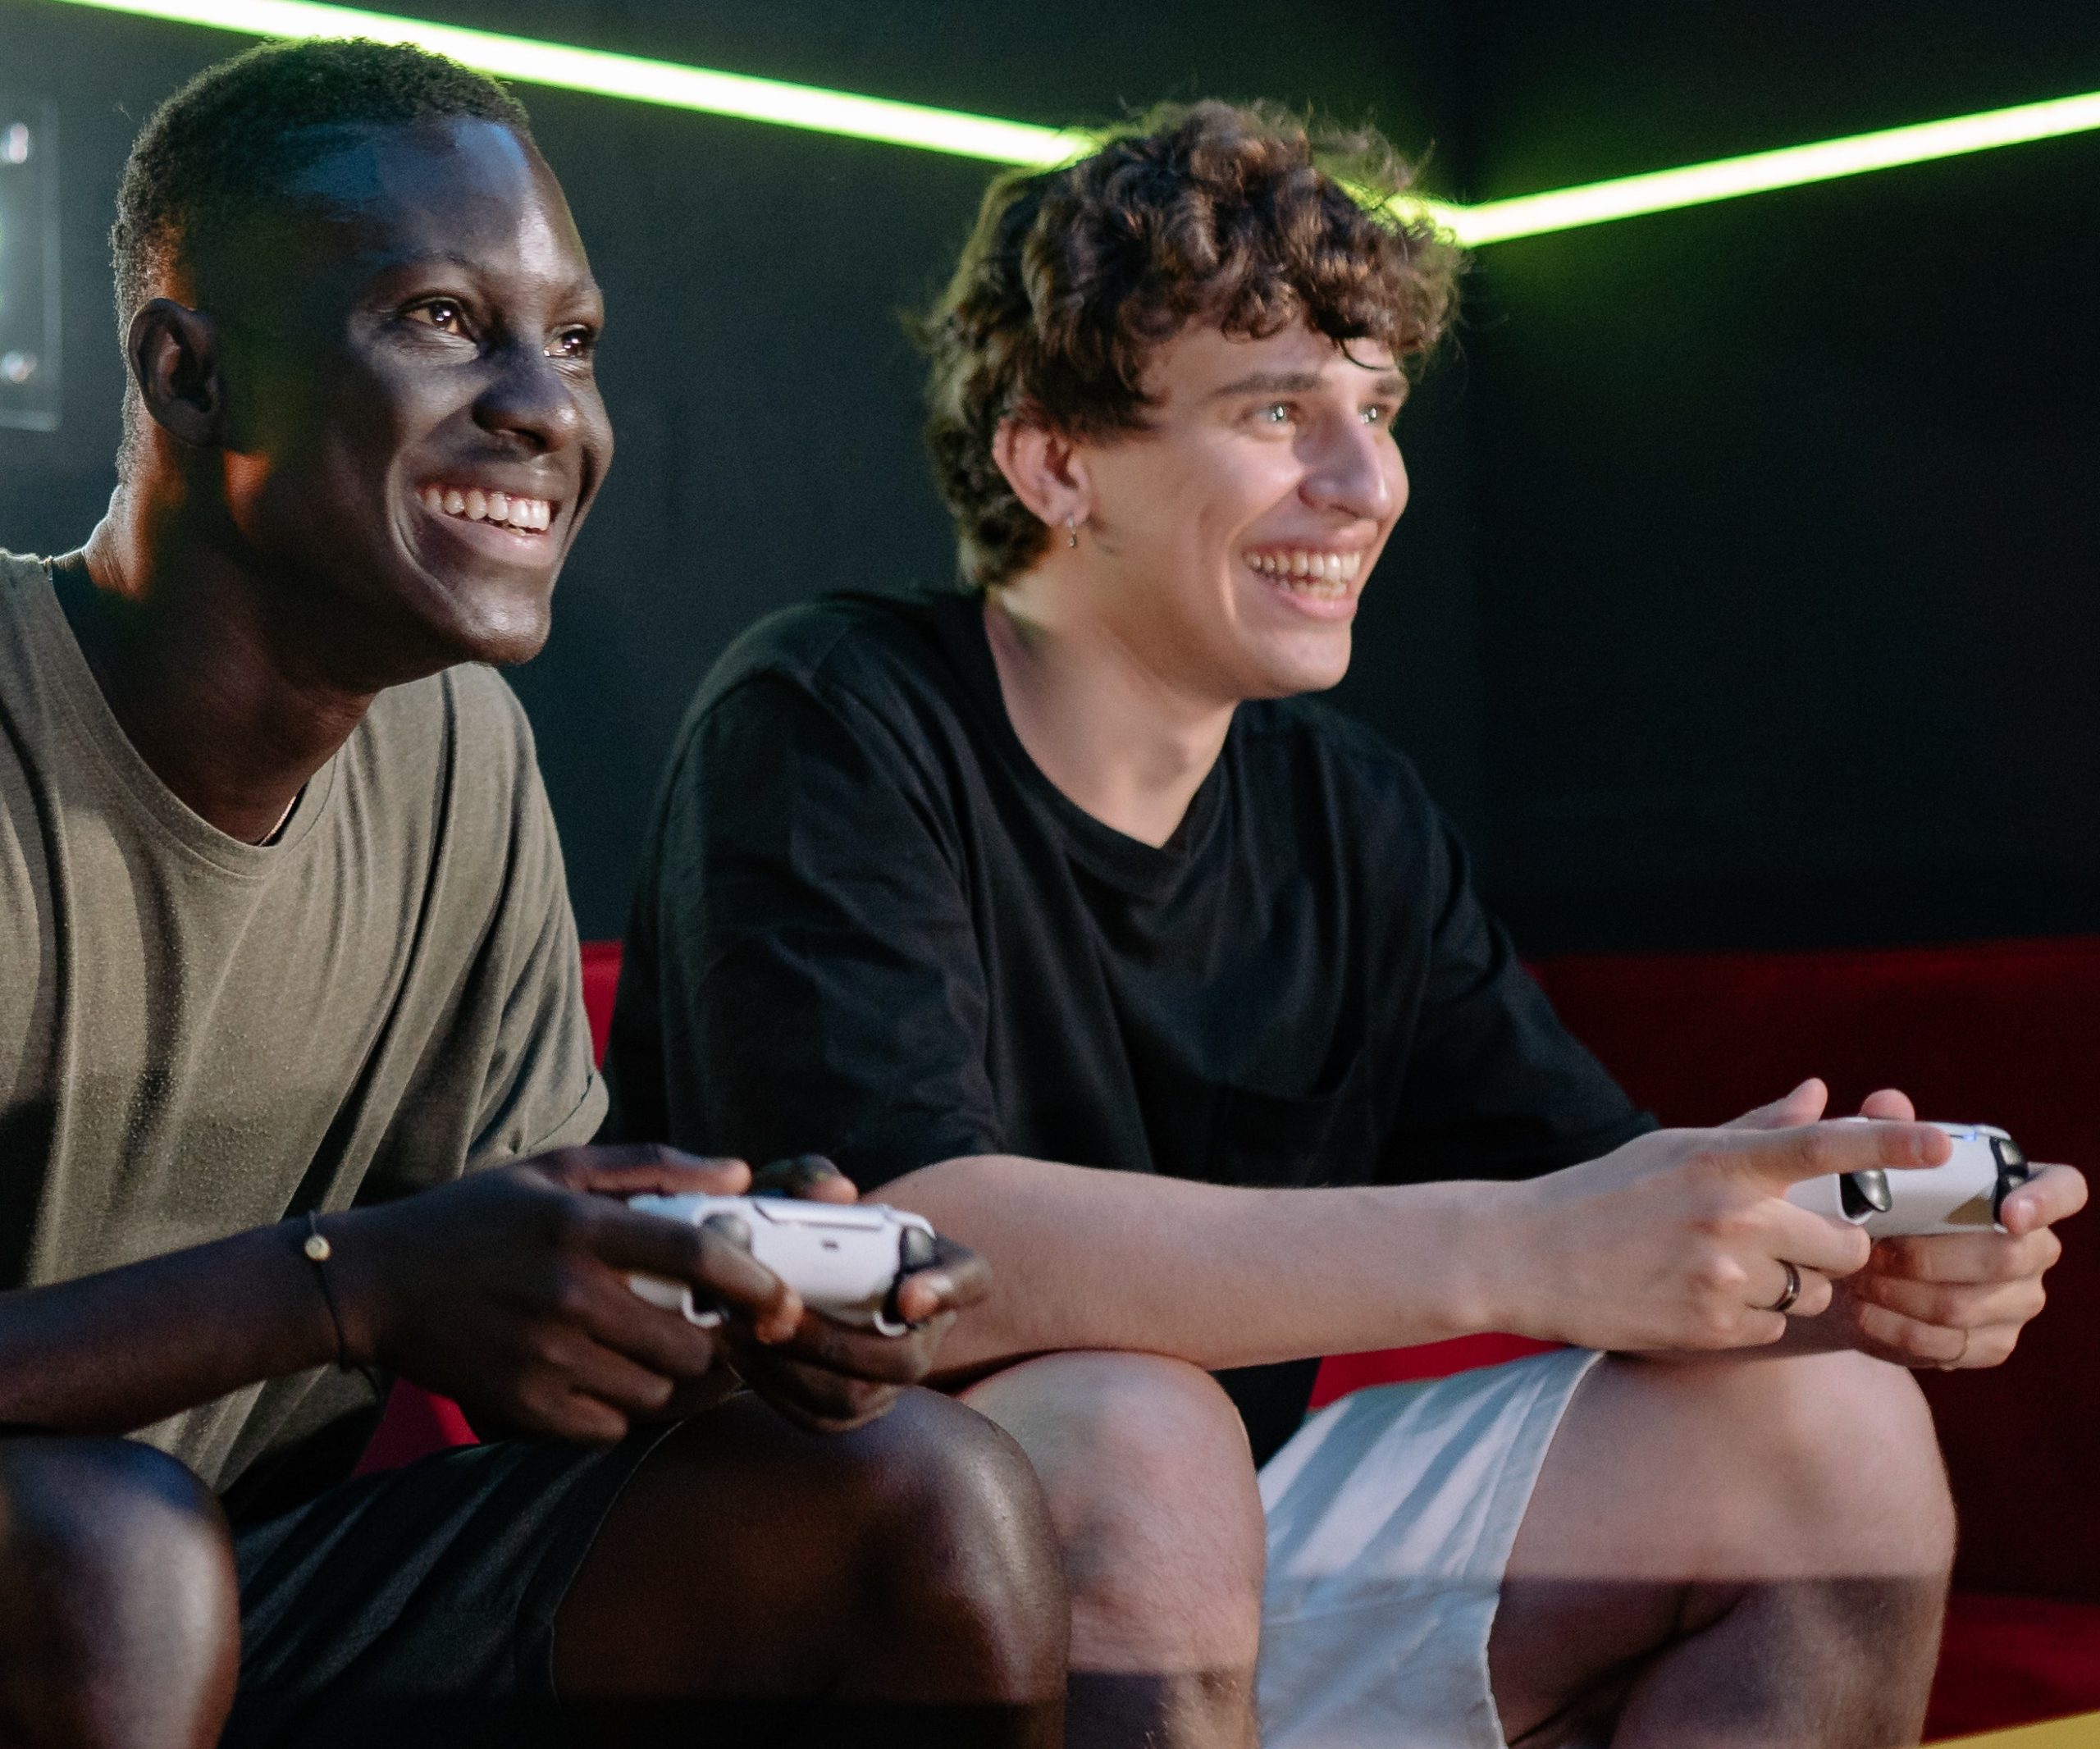 Africa's gaming industry need serious investment